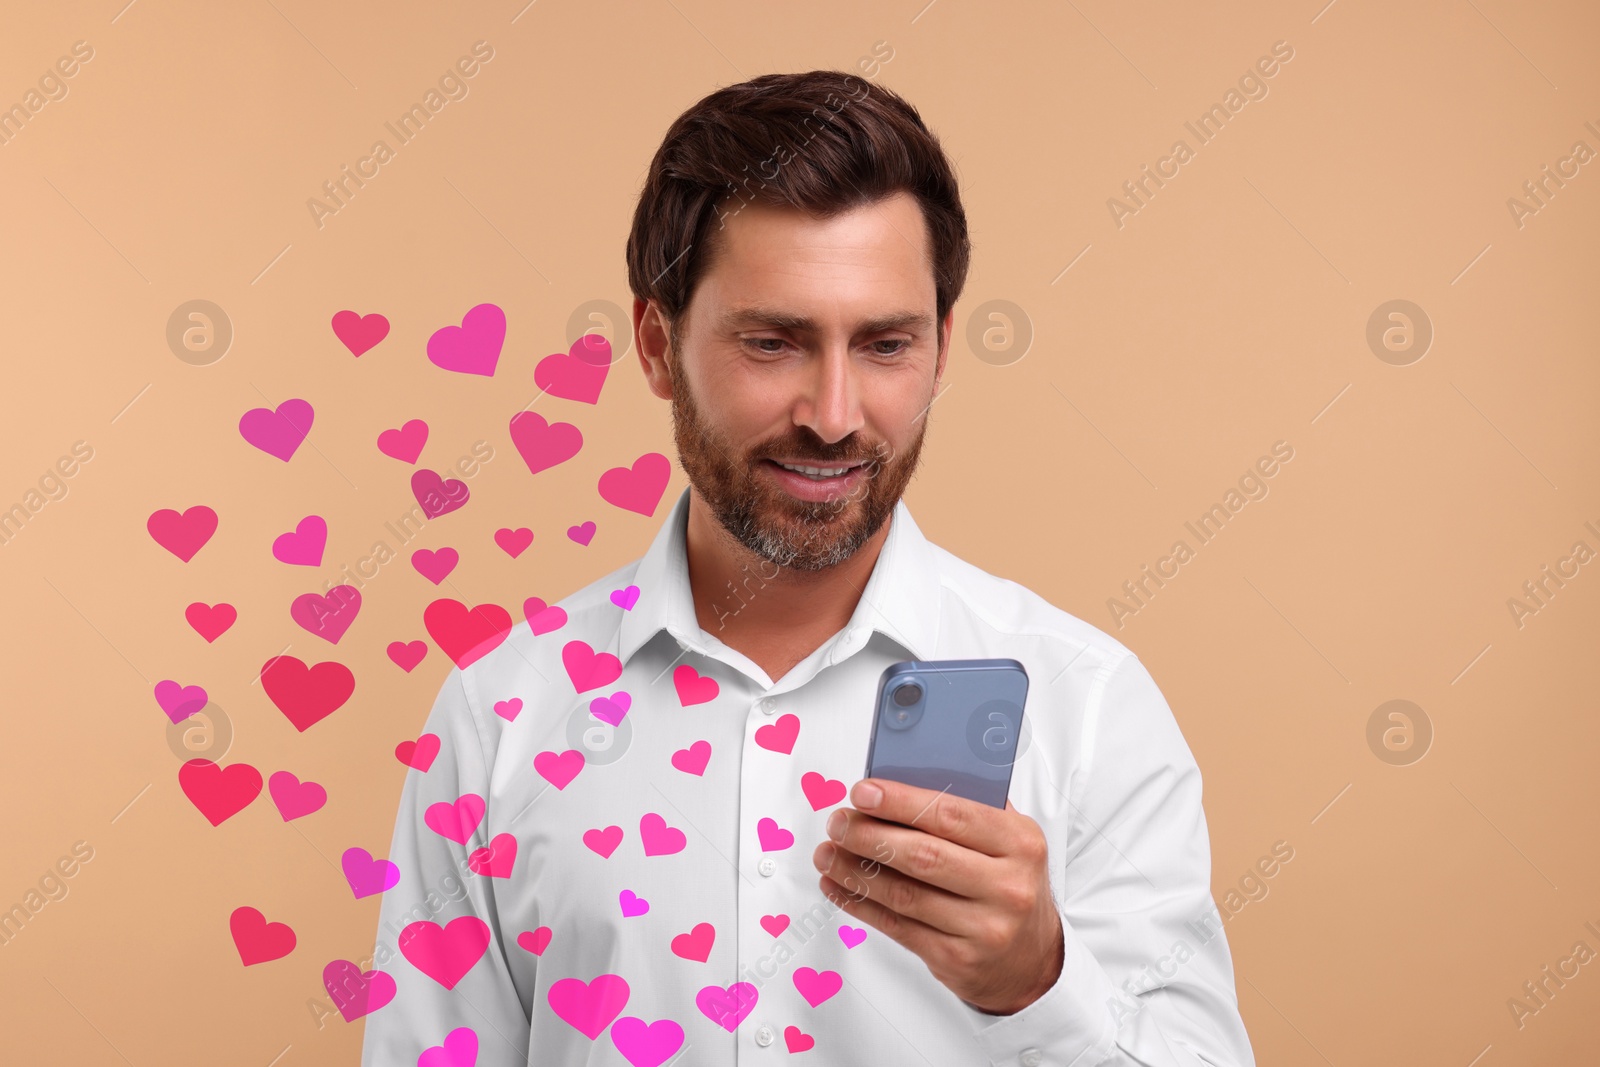 Image of Long distance love. Man chatting with sweetheart via smartphone on dark beige background. Hearts flying out of device